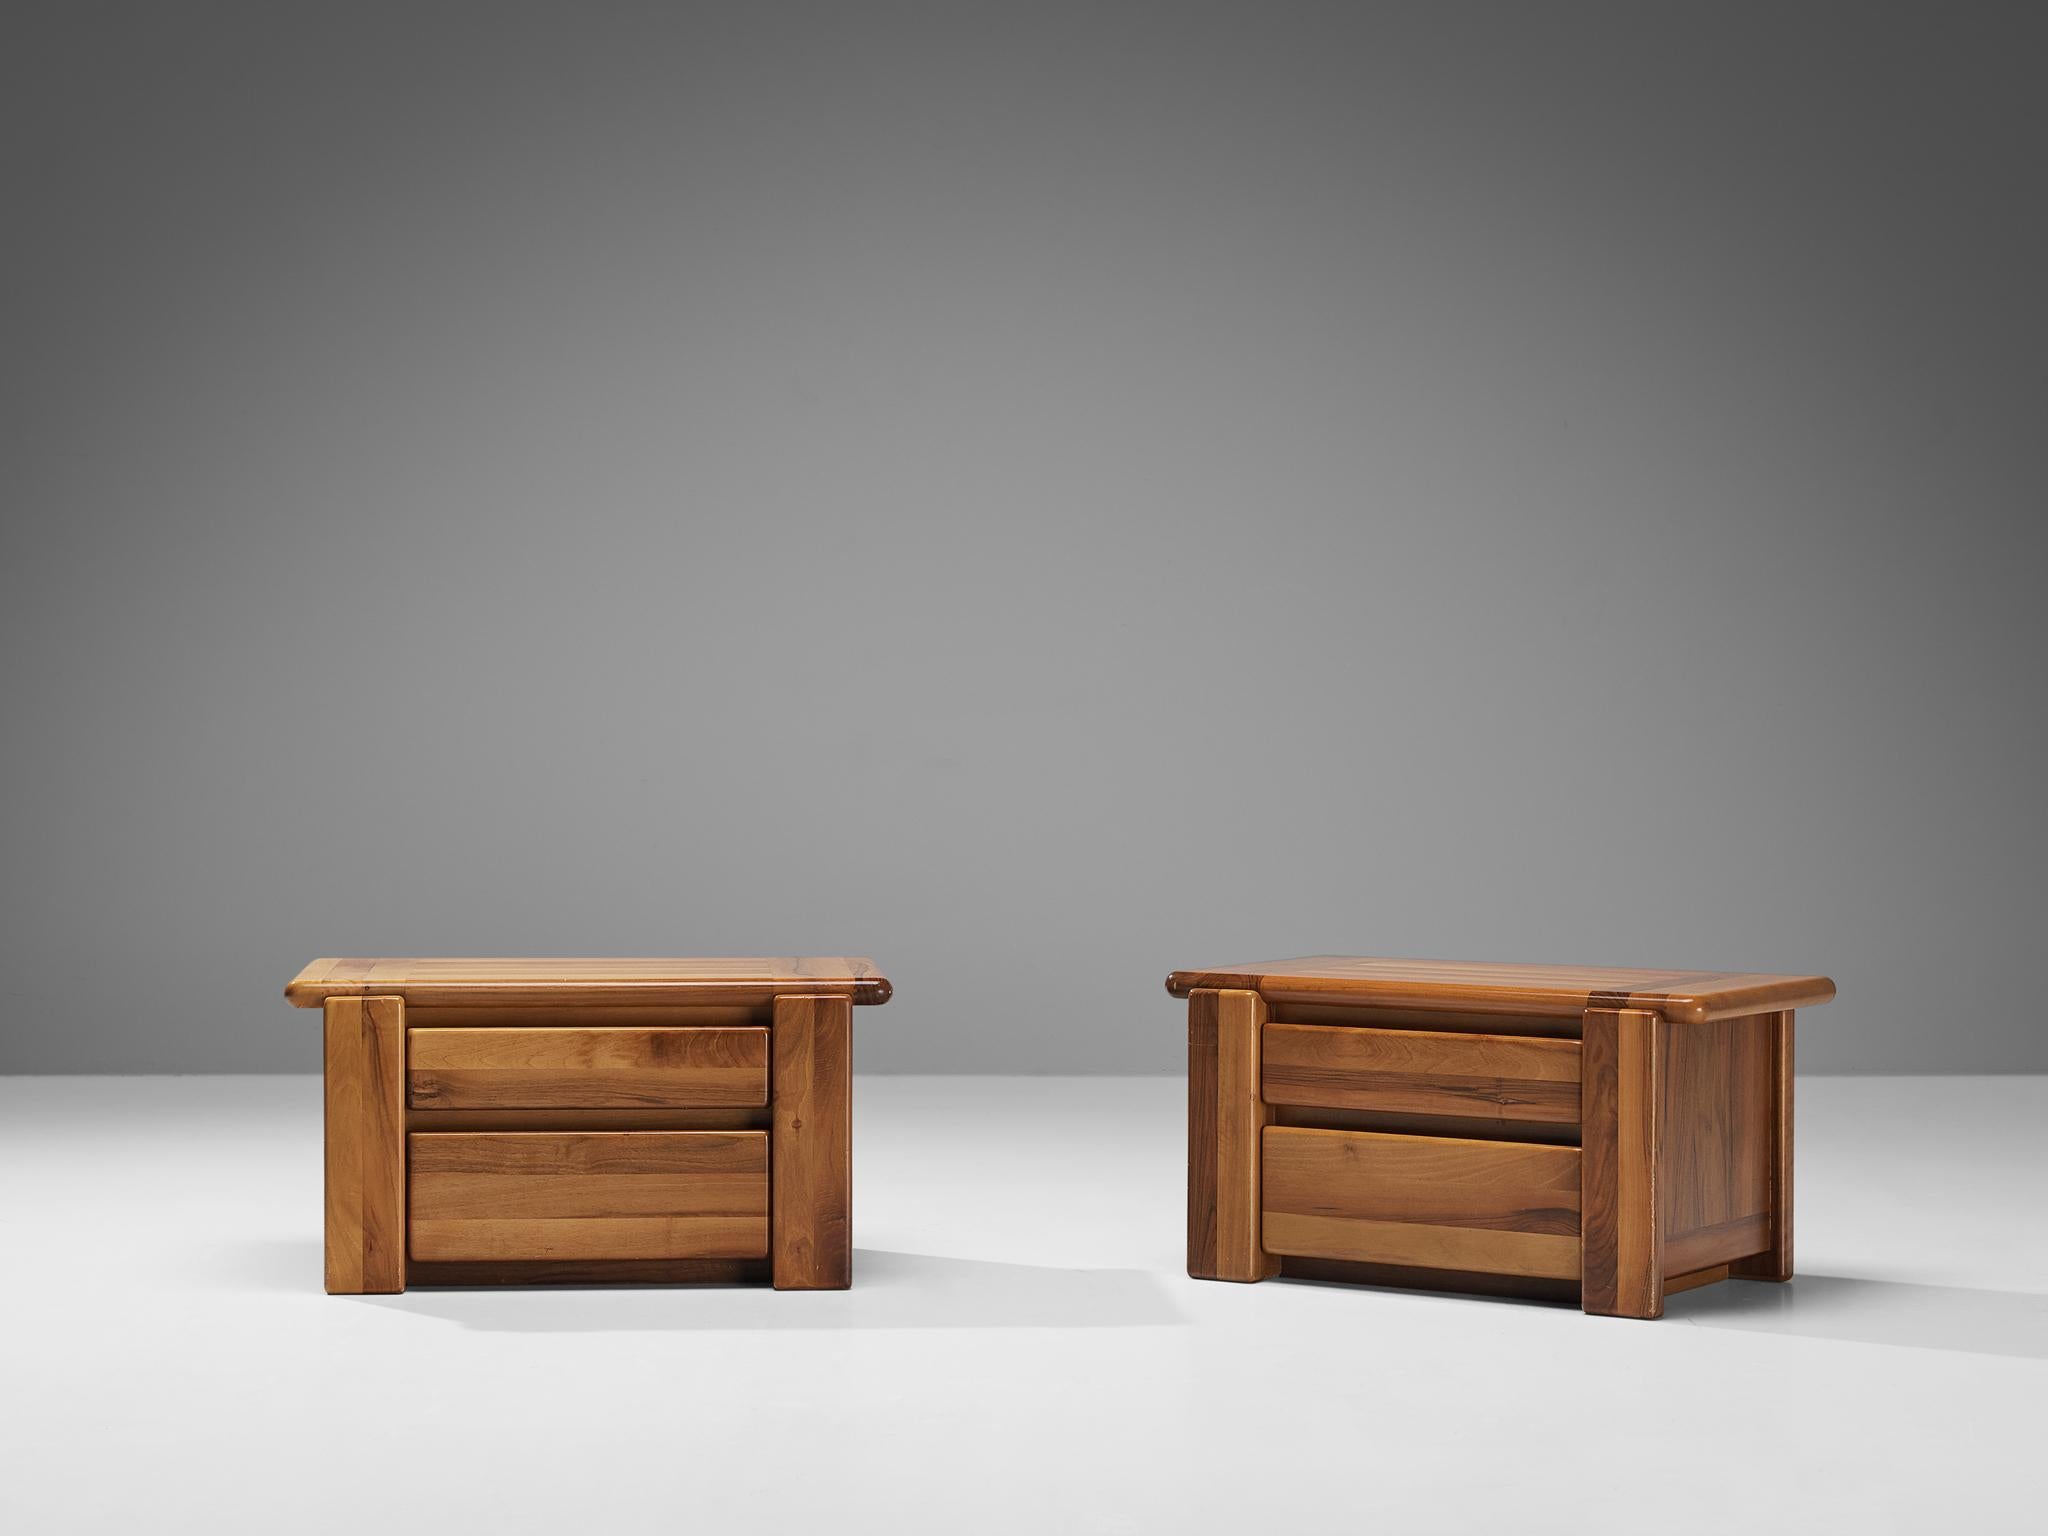 Mario Marenco for Mobil Girgi, sideboard model 'Sapporo', walnut, Italy, 1970s

An exceptional pair of nightstands by the Italian designer. architect and actor Mario Marenco (1933-2019), featuring a high-level of craftsmanship in woodwork. The whole